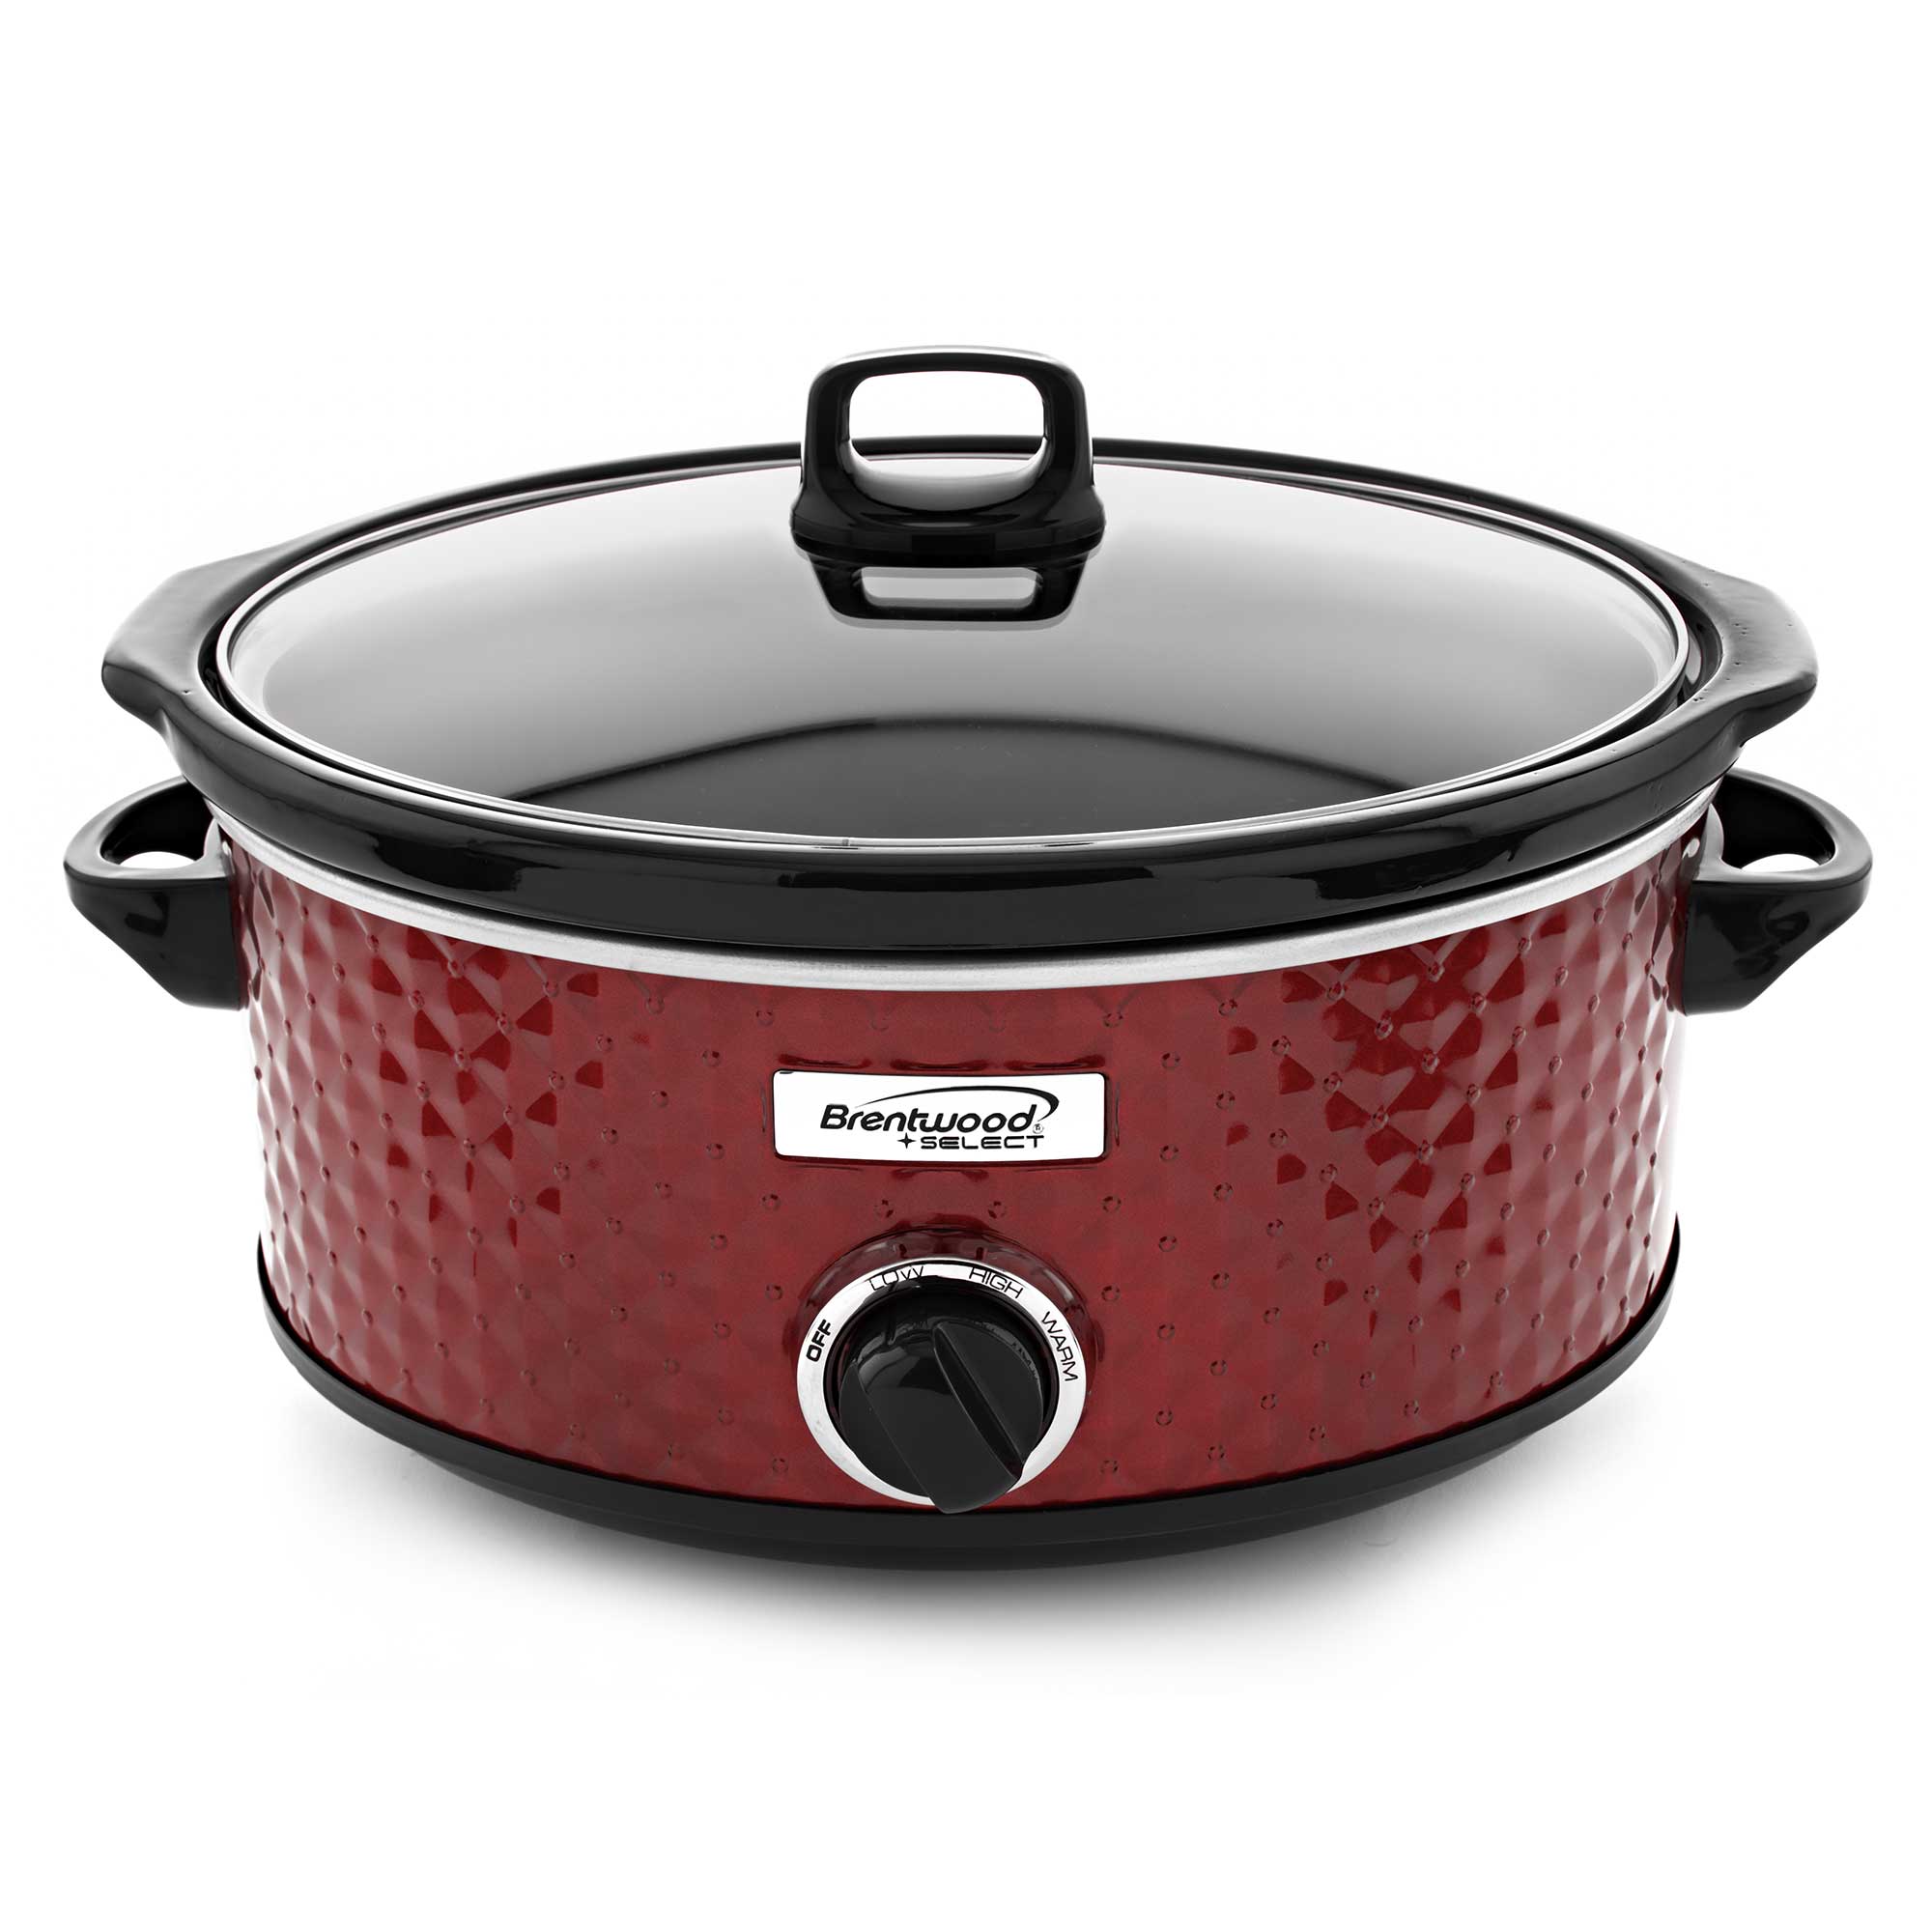 Crock-Pot 7 Qt. Capacity Red Food Slow Cooker Home Cooking Kitchen